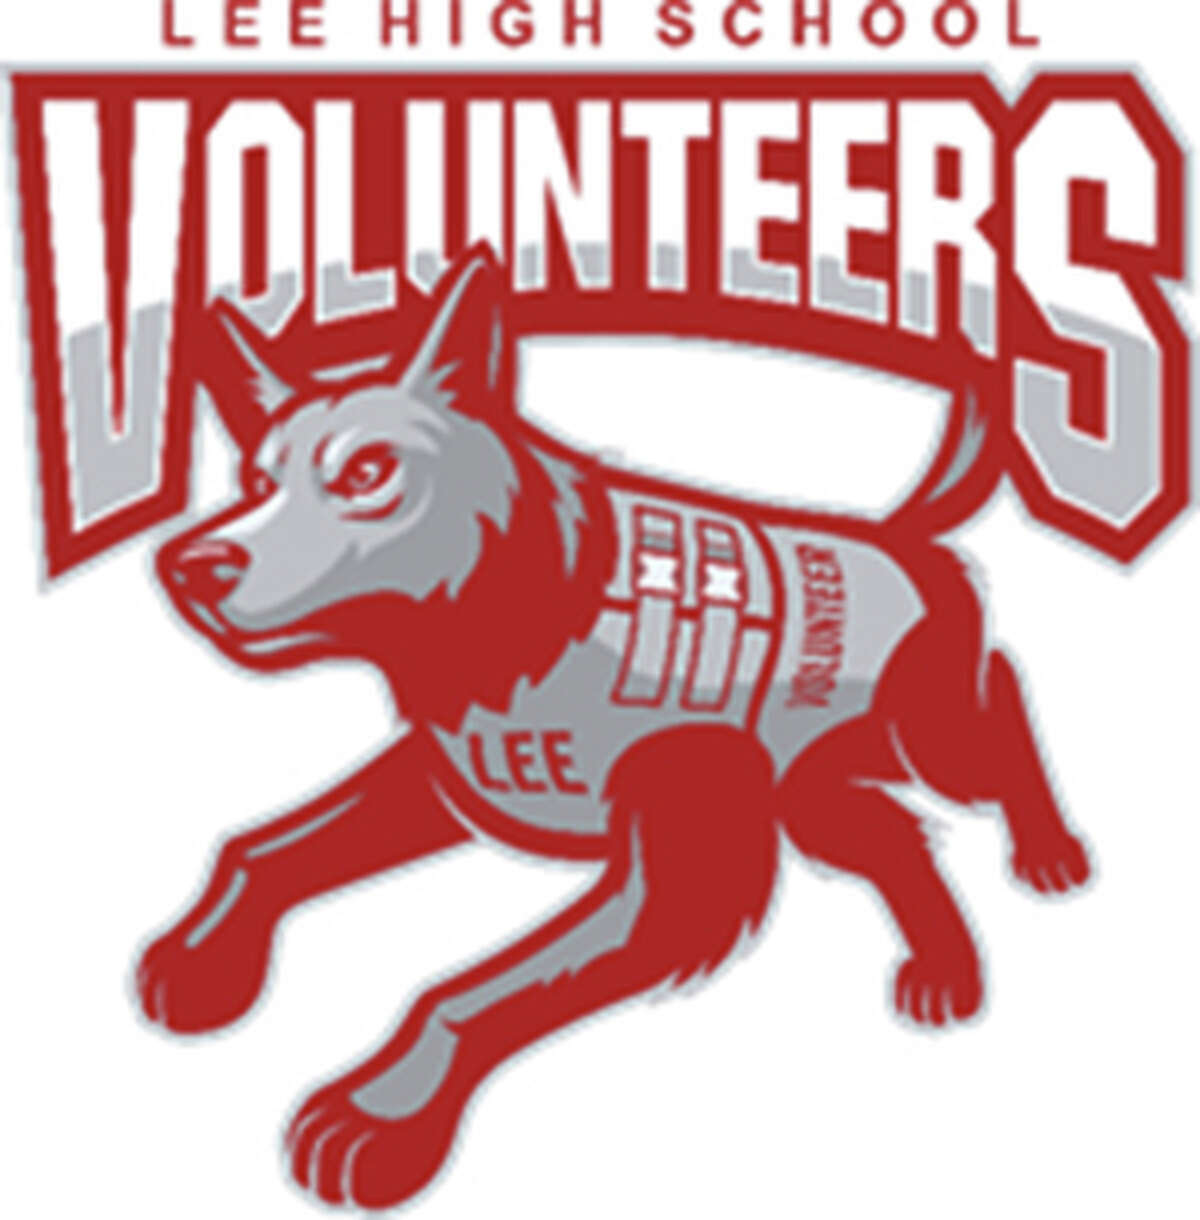 Beginning in the 2018-2019 school year, a new “Volunteers” mascot will represent Legacy of Educational Excellence (LEE) High School. Eligible students voted on possible mascot designs last week, and the image receiving the most votes was the military service dog. This image, along with the new school name, will not go into effect until the conclusion of this school year.